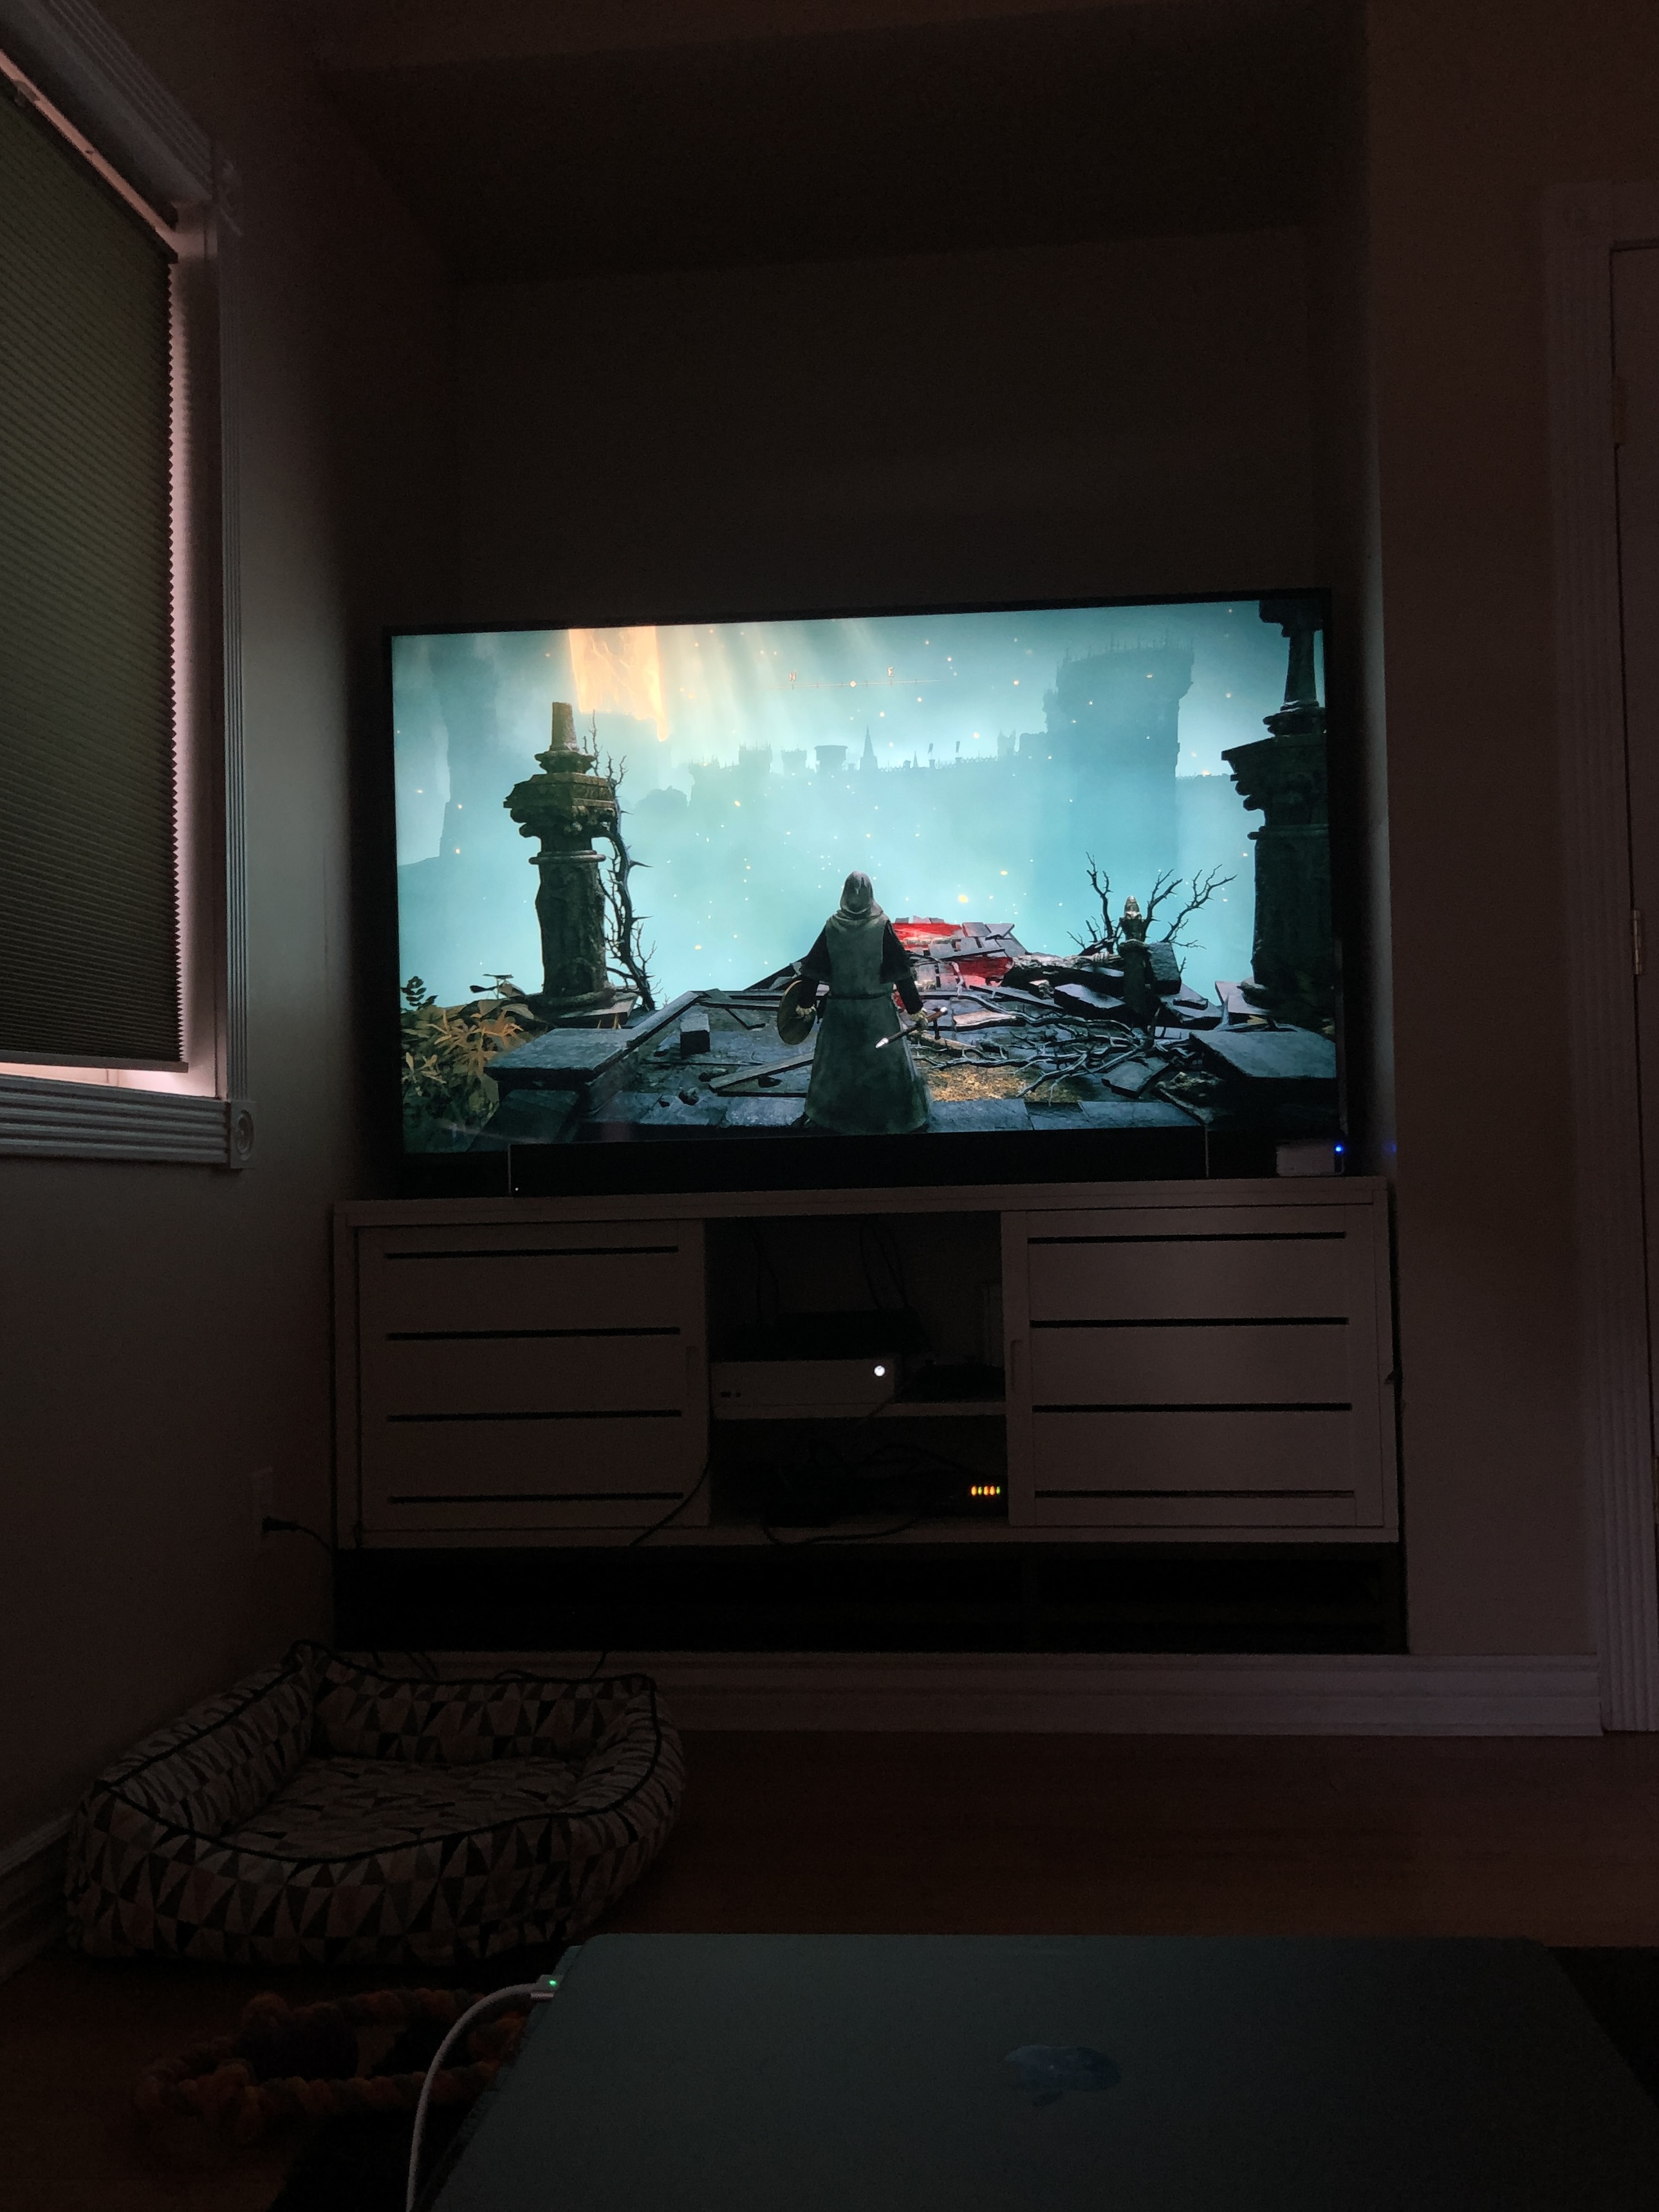 A TV in a dark room showing a video game character standing on a high platform overlooking a valley